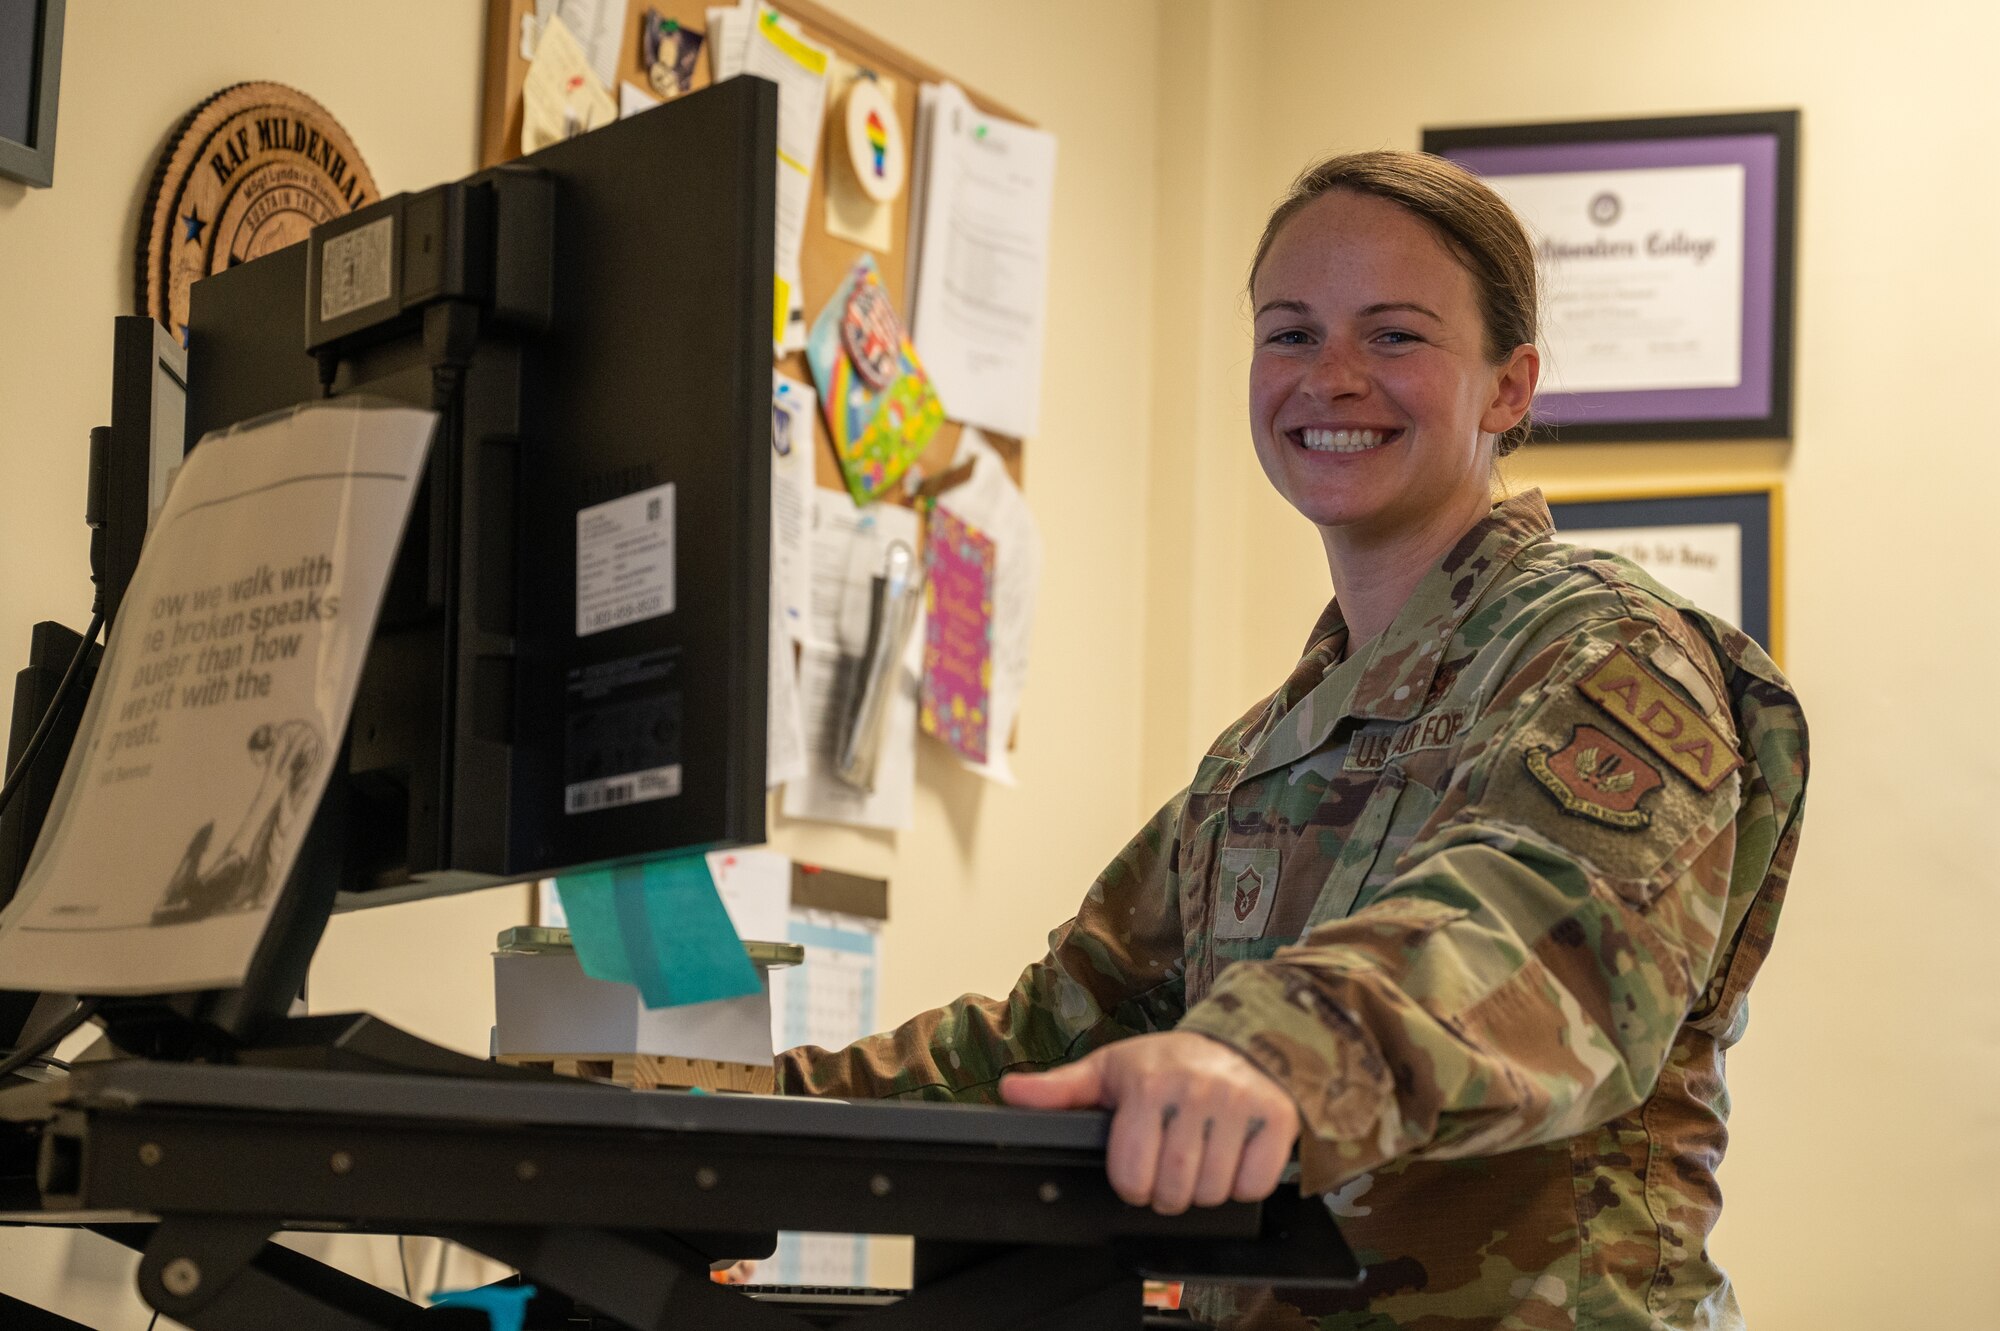 U.S. Air Force Master Sgt. Lyndsie Duemmel, 100th Air Refueling Wing Airmen development advisor, oversees the operations at the Dewey R. Christopher Professional Development Center, Jan. 11, 2023, at Royal Air Force Mildenhall, England.